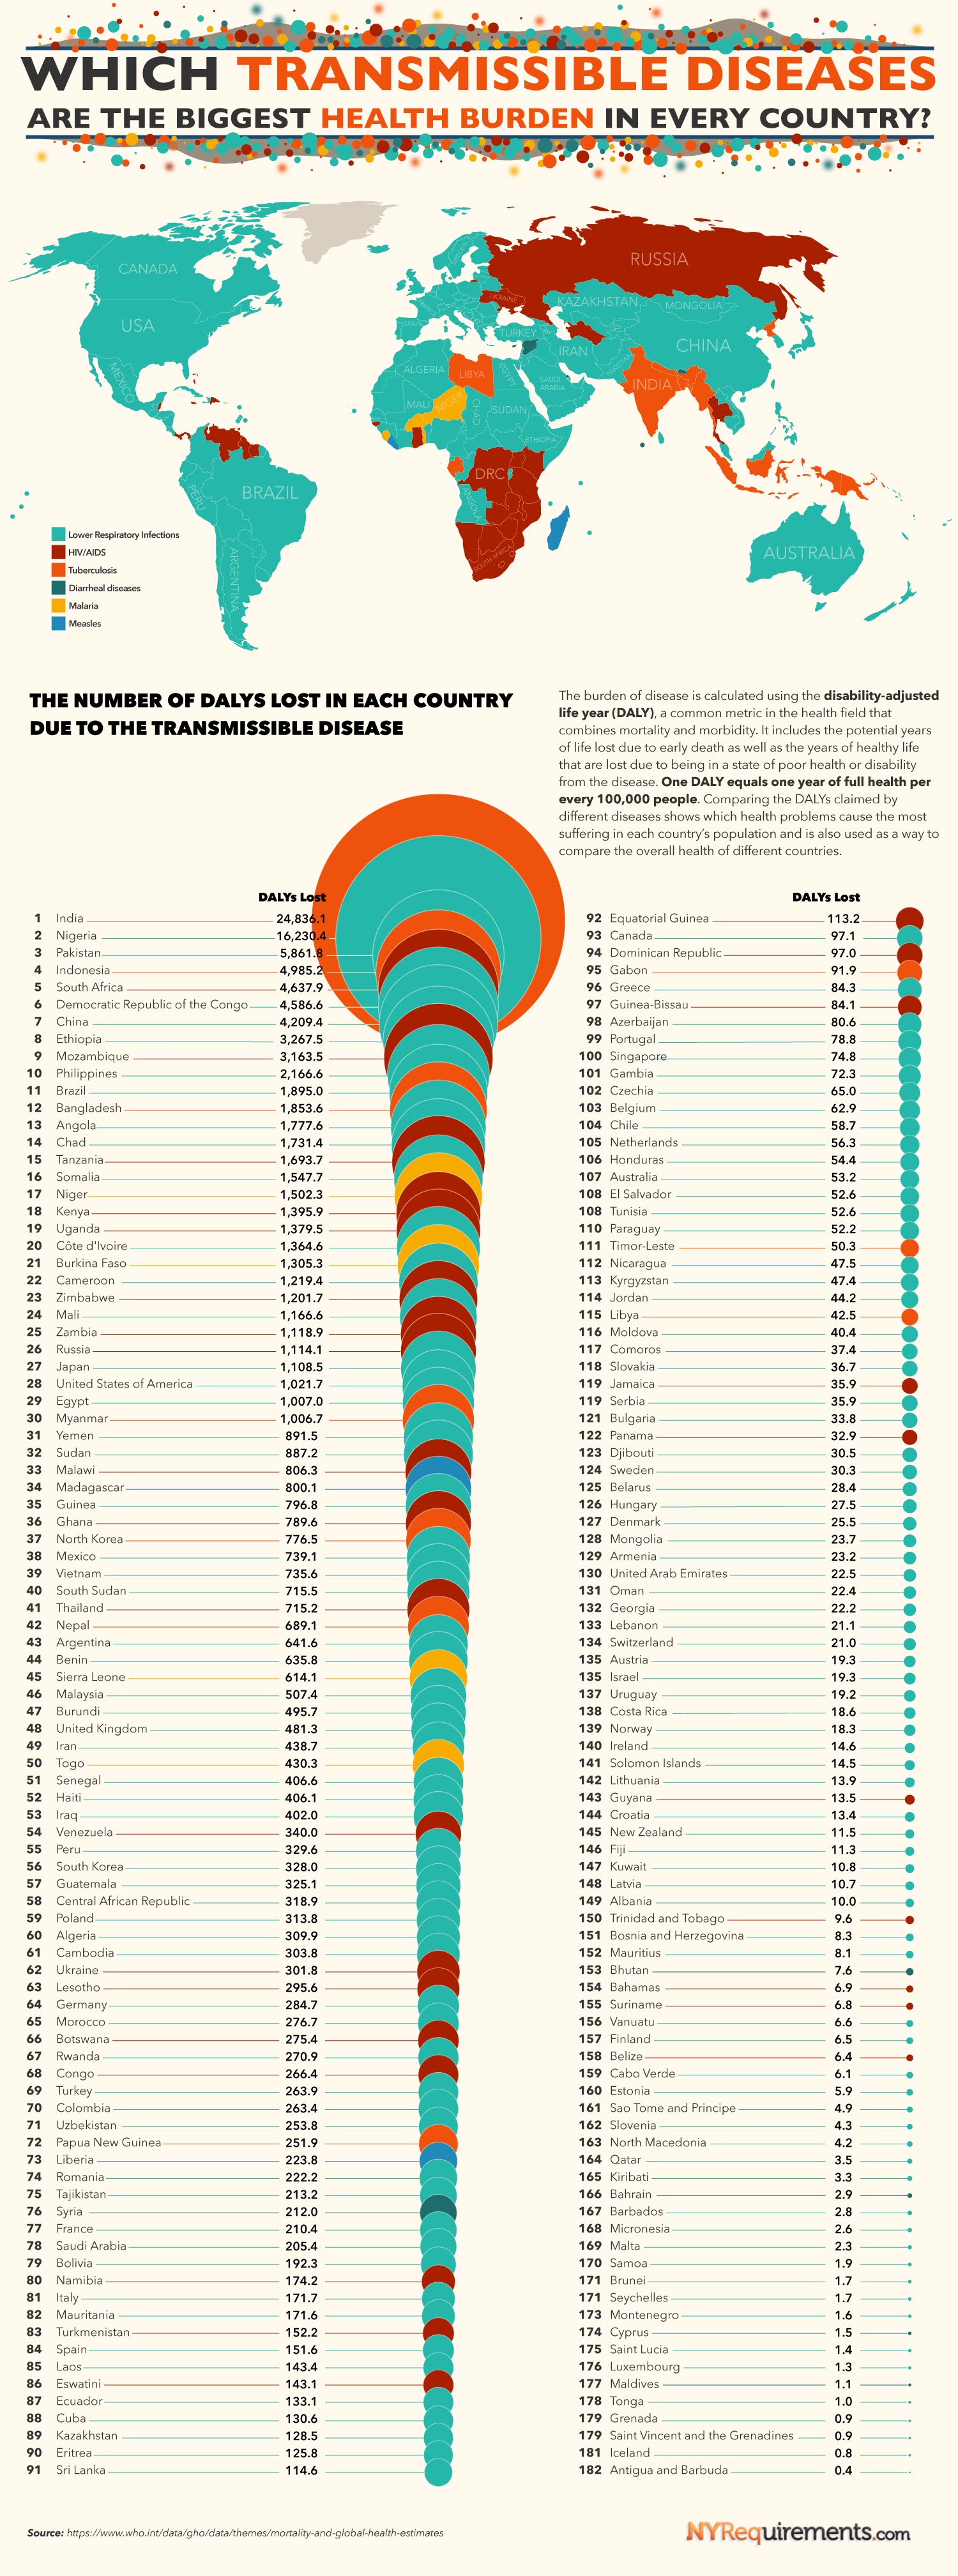 Which Transmissible Diseases are the Biggest Health Burden in Every Country? #Infographic